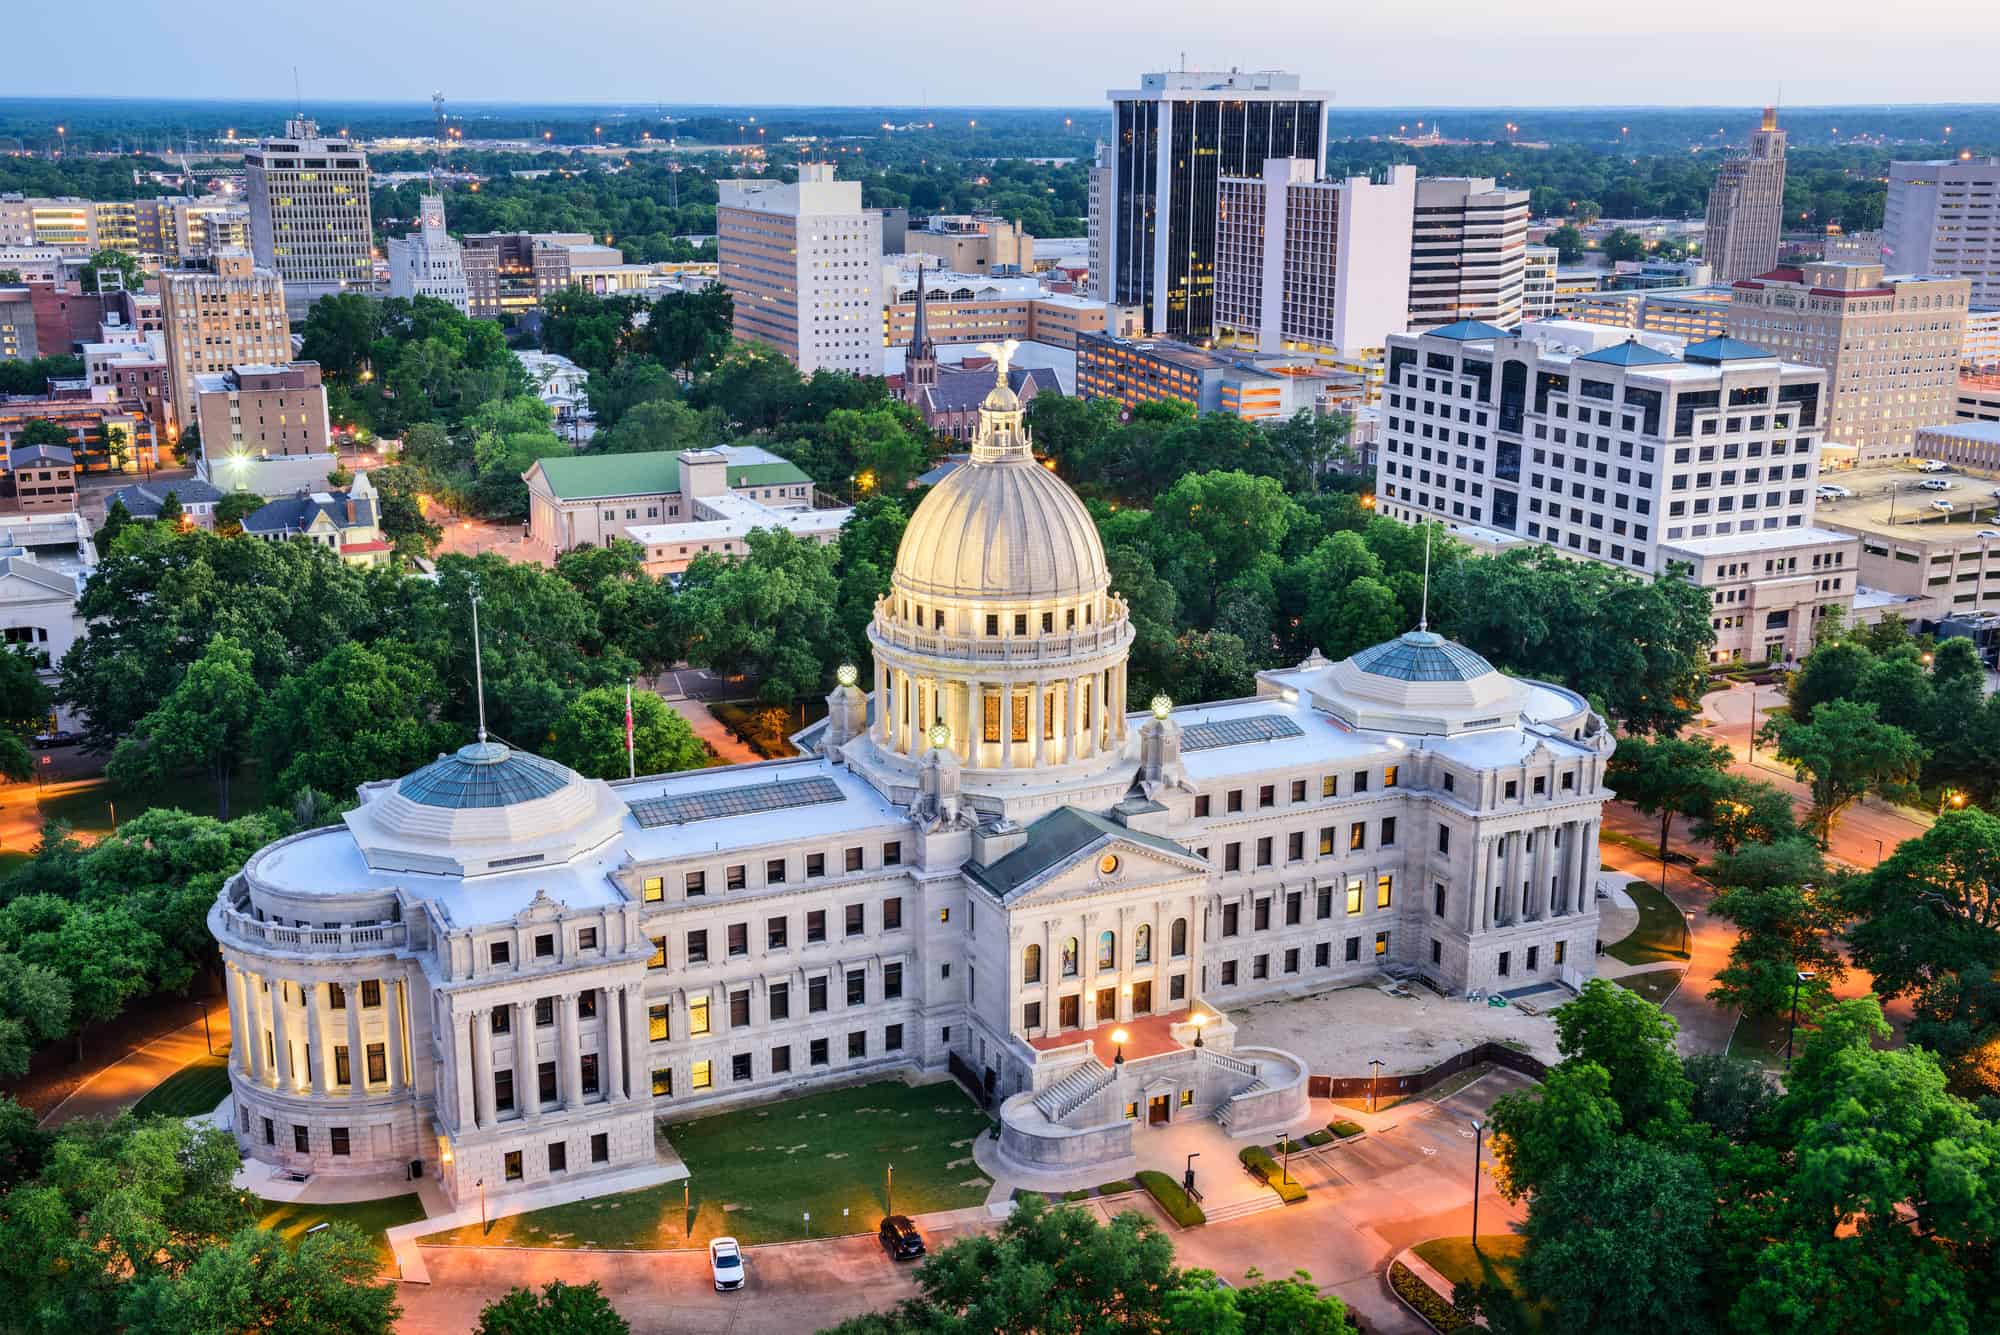 <p>Madison, Mississippi, is a small town with a lot to offer. It scored high marks in safety, economy, education, and healthcare. With a low cost of living and plenty of outdoor activities to enjoy, Madison is an excellent choice for those seeking a slower pace of life.</p>